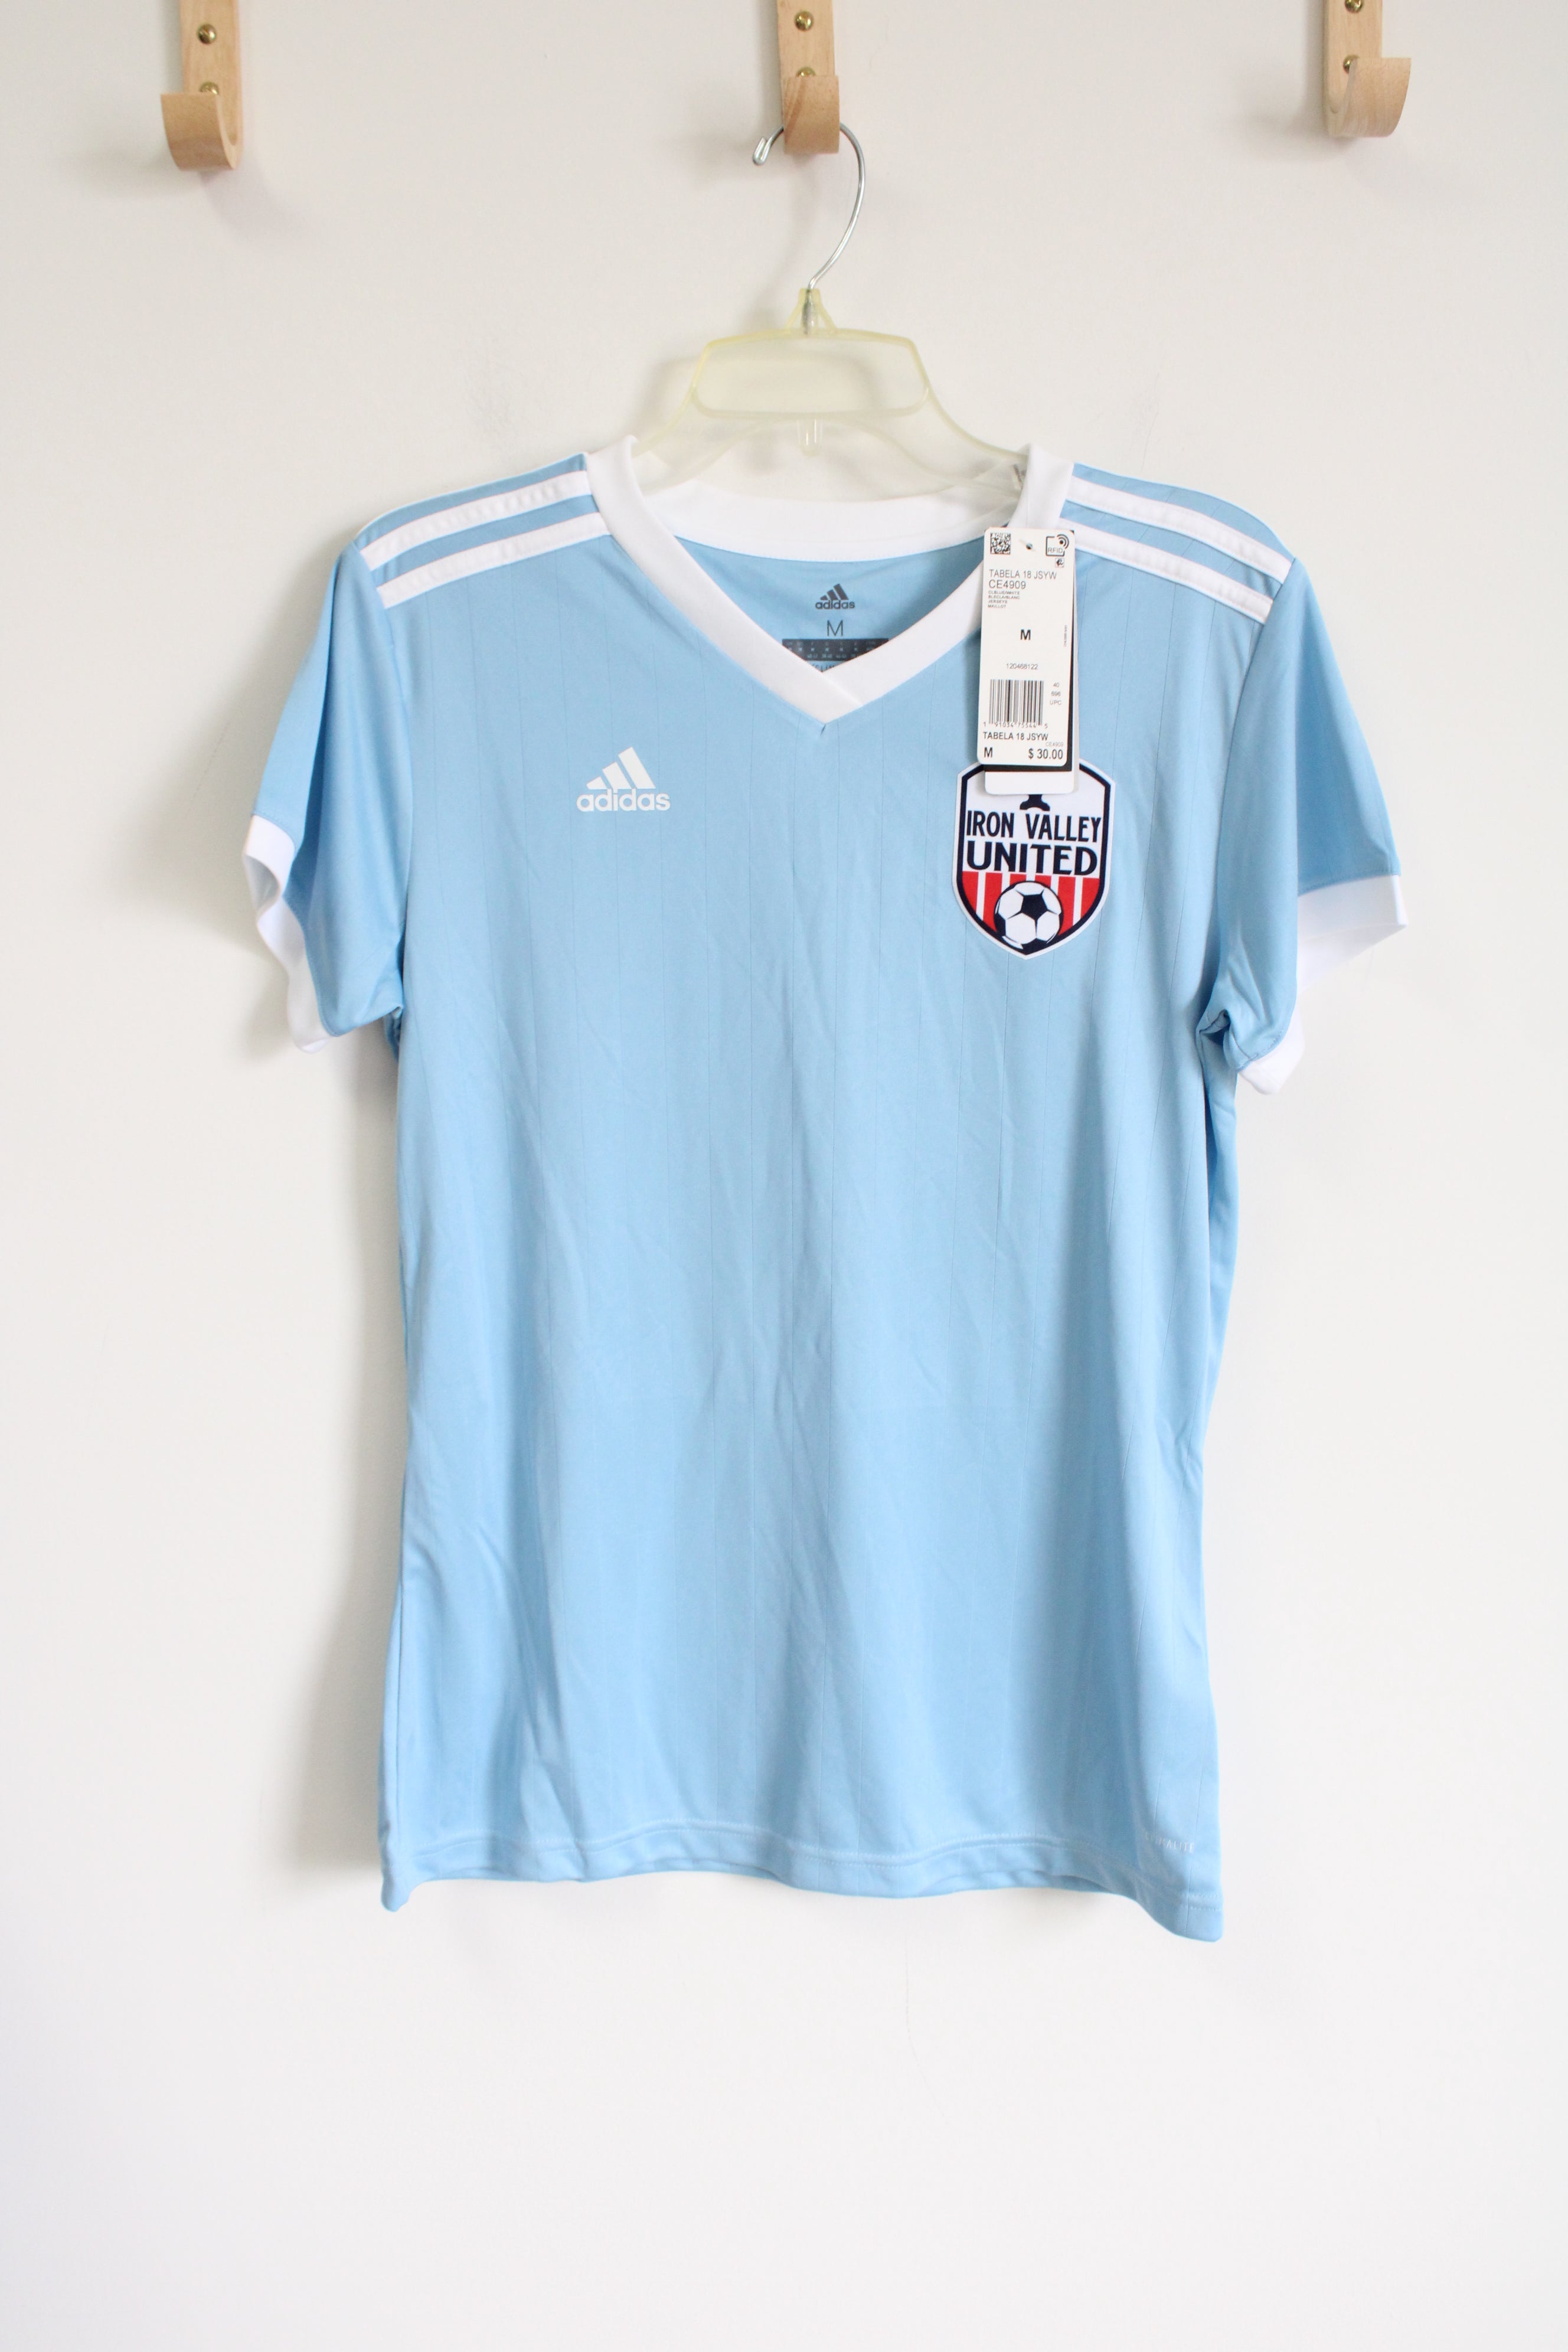 NEW Adidas Climalite Iron Valley United Soccer #32 Shirt | M